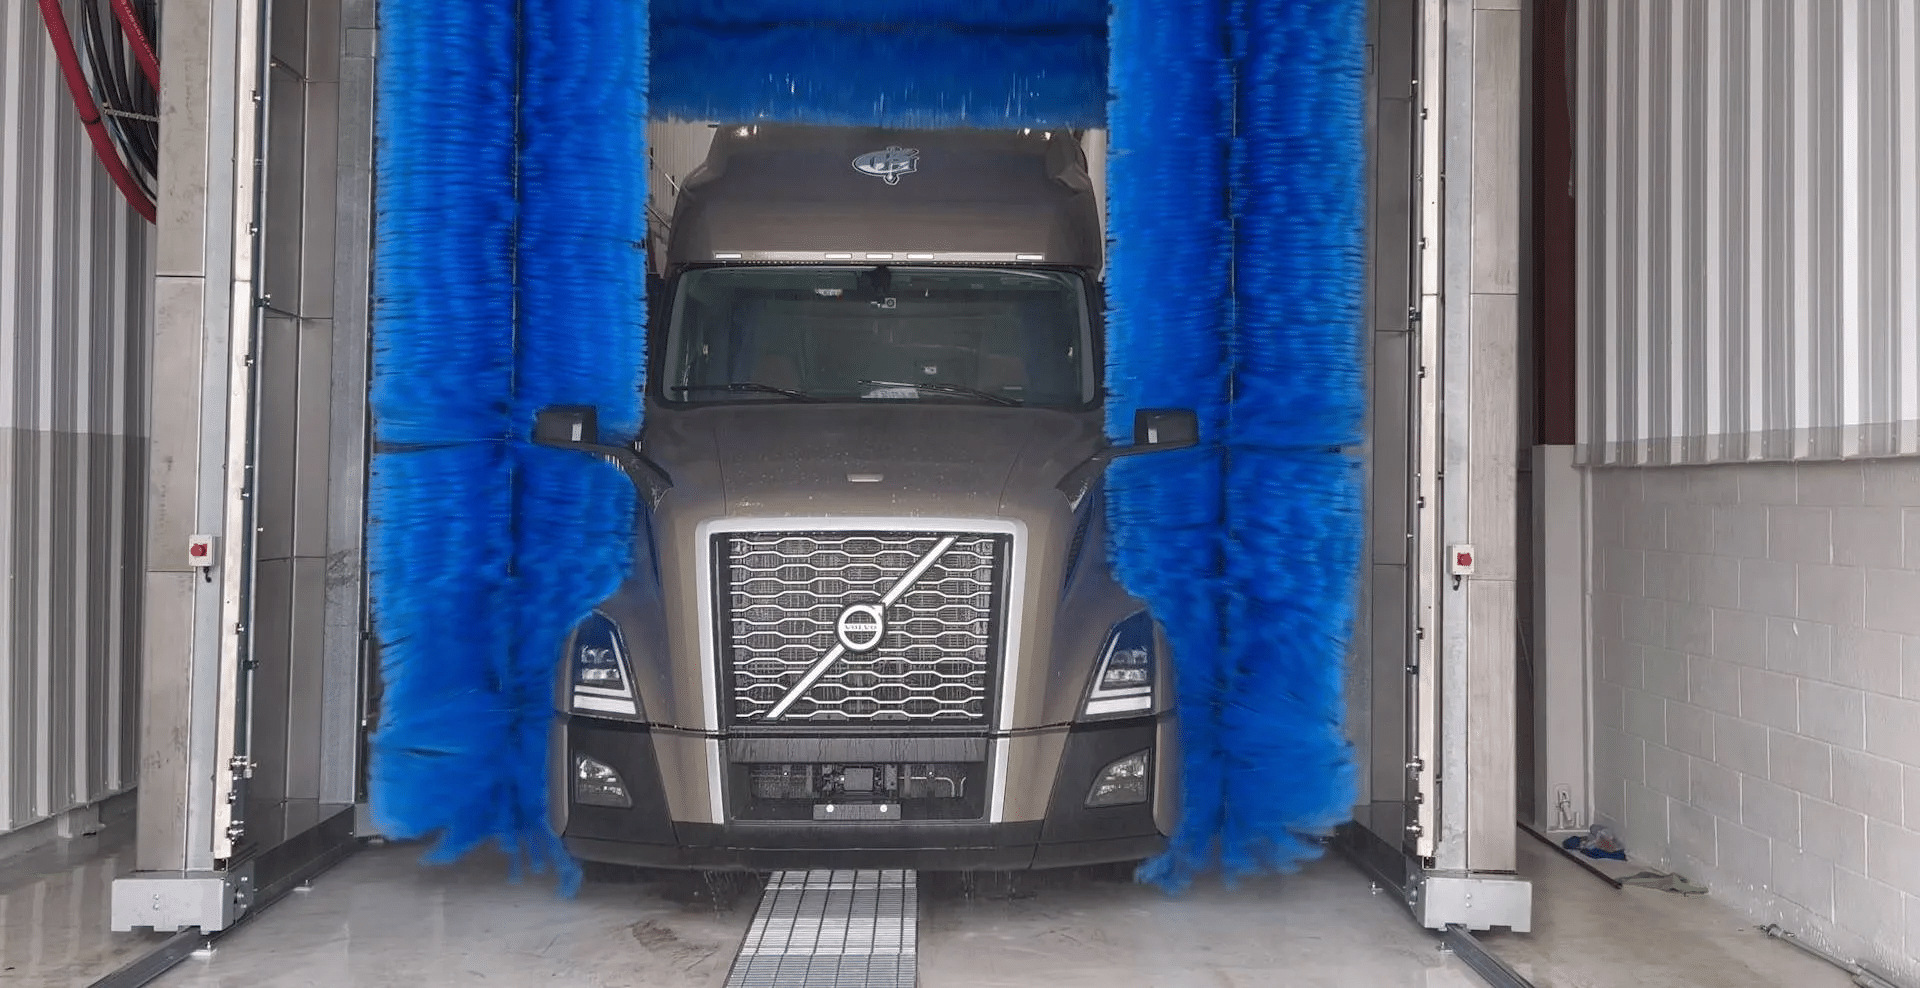 A semi-truck is being washed by large blue brushes in an industrial vehicle wash station.